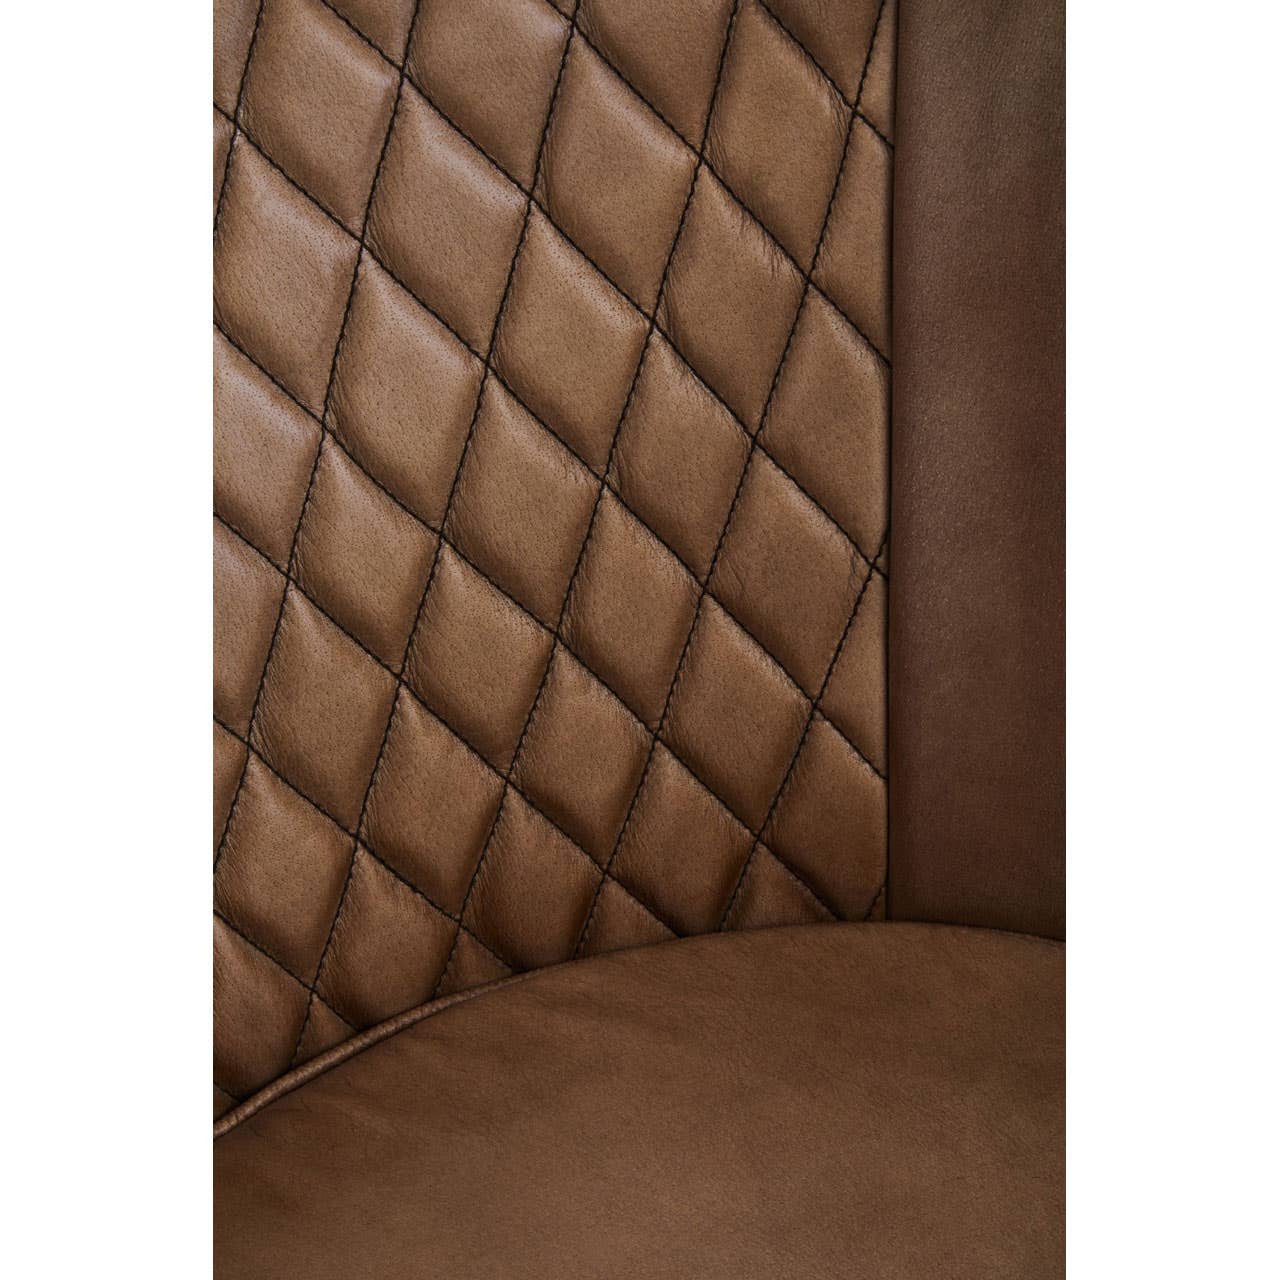 Noosa & Co. Living Buffalo Brown Leather Diamond Tufted Chair House of Isabella UK